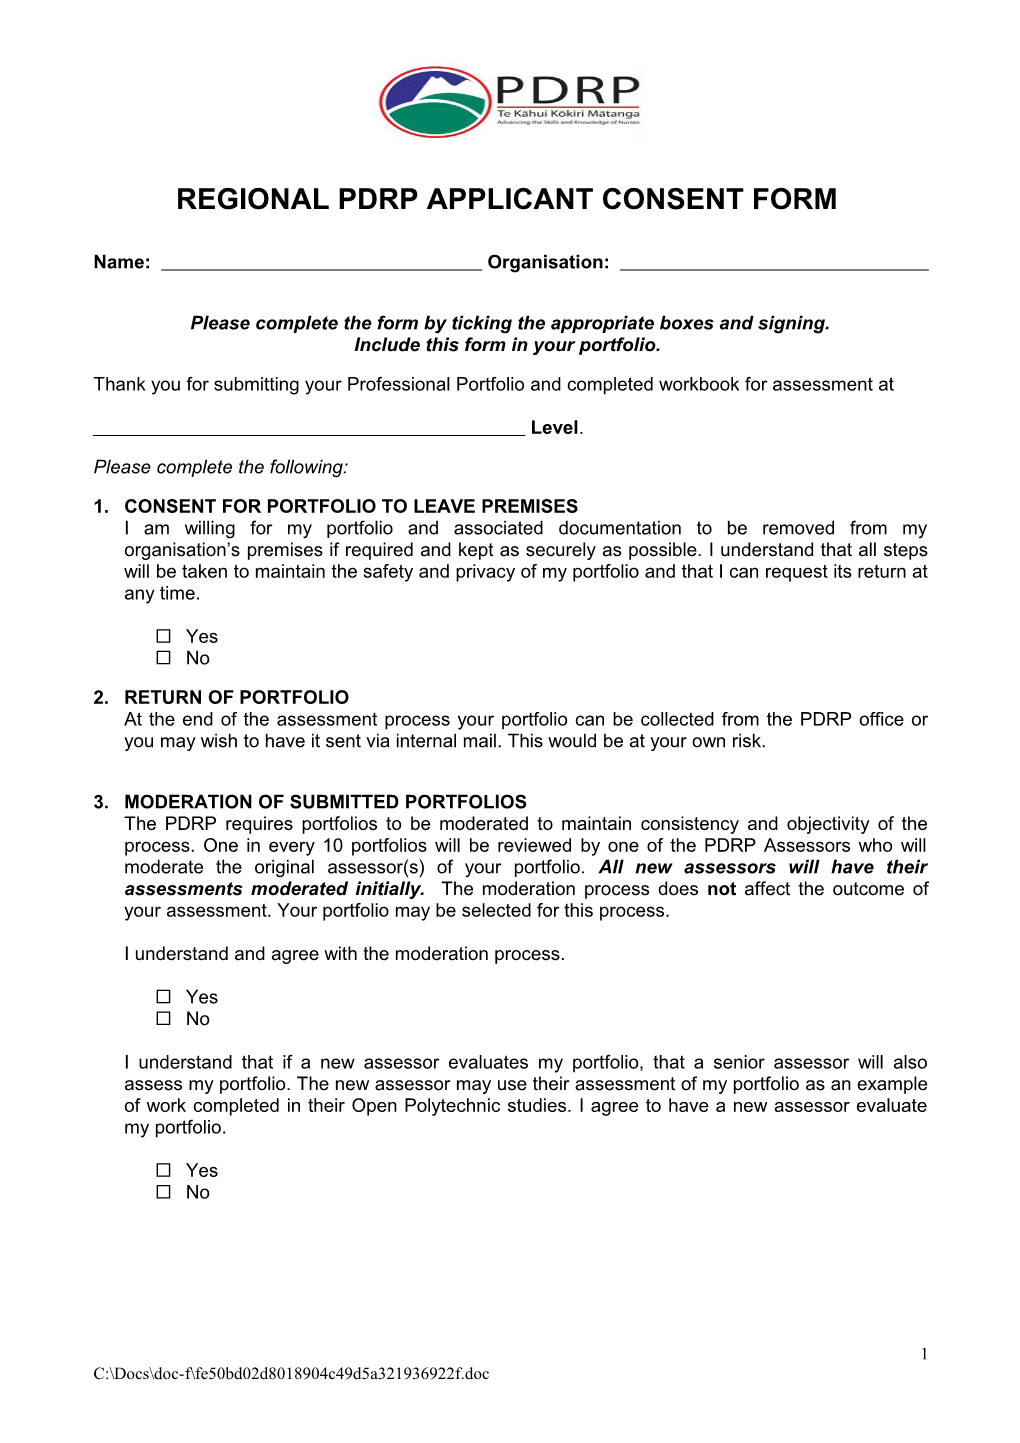 PDRP Applicant Consent Form for Proficient/Expert Levels